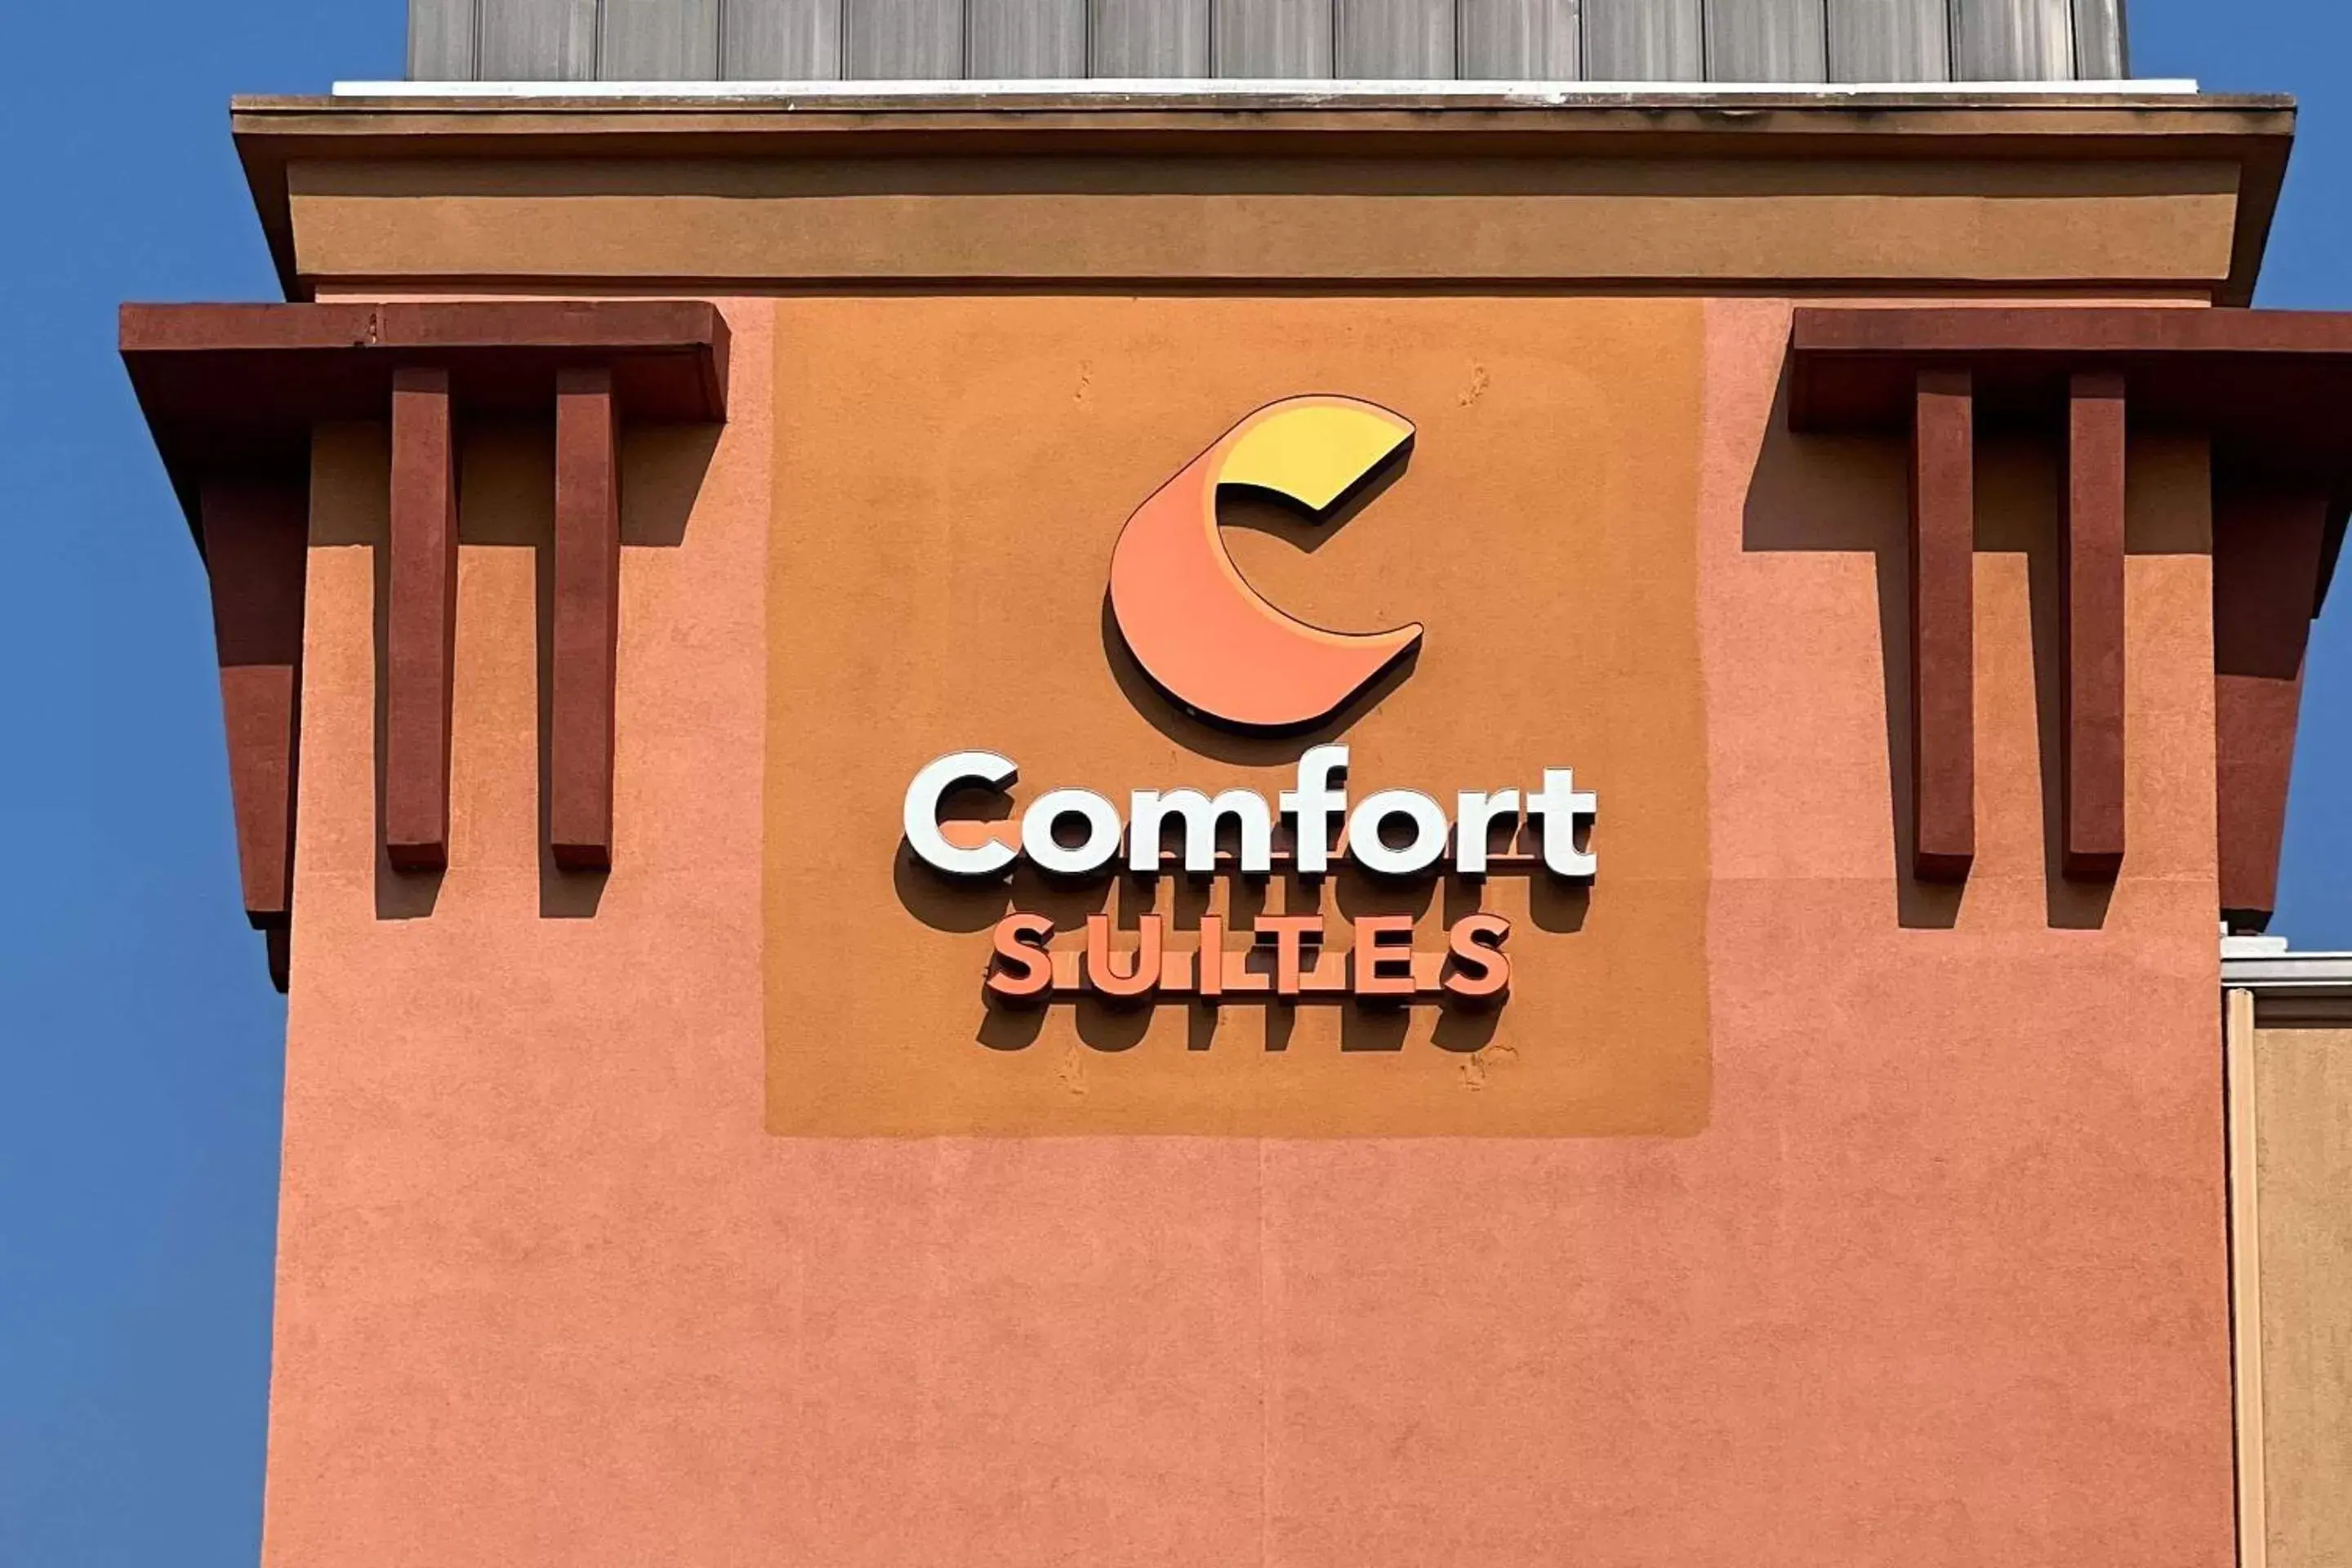 Property building in Comfort Suites Seaford